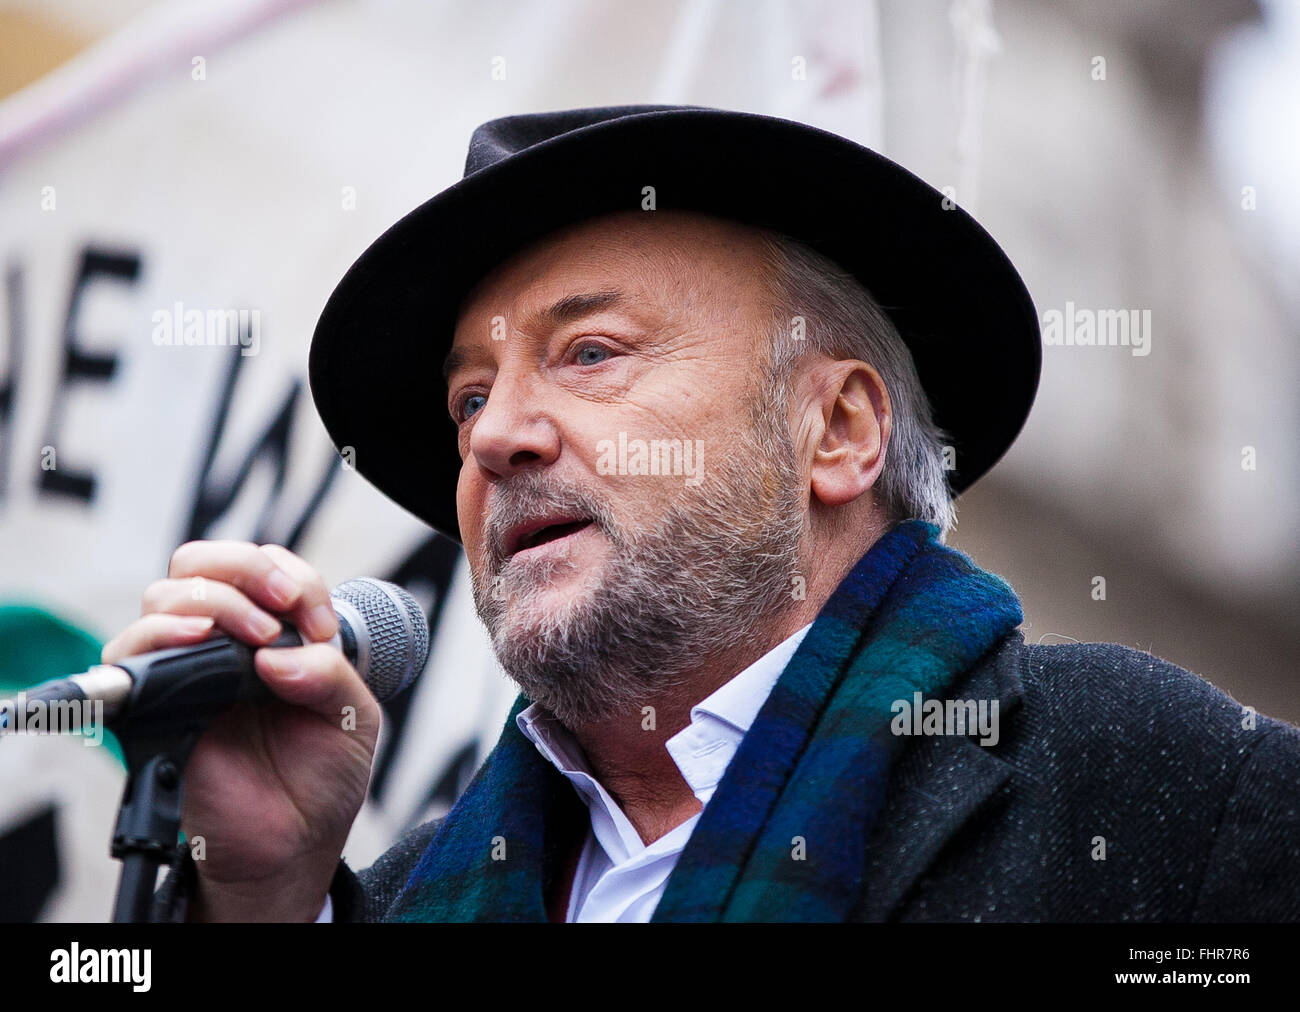 London UK 28 November 2015 - George Galloway, former Respect Party MP and 2016 London Mayor candidate speaking at the Don't Bomb Stock Photo